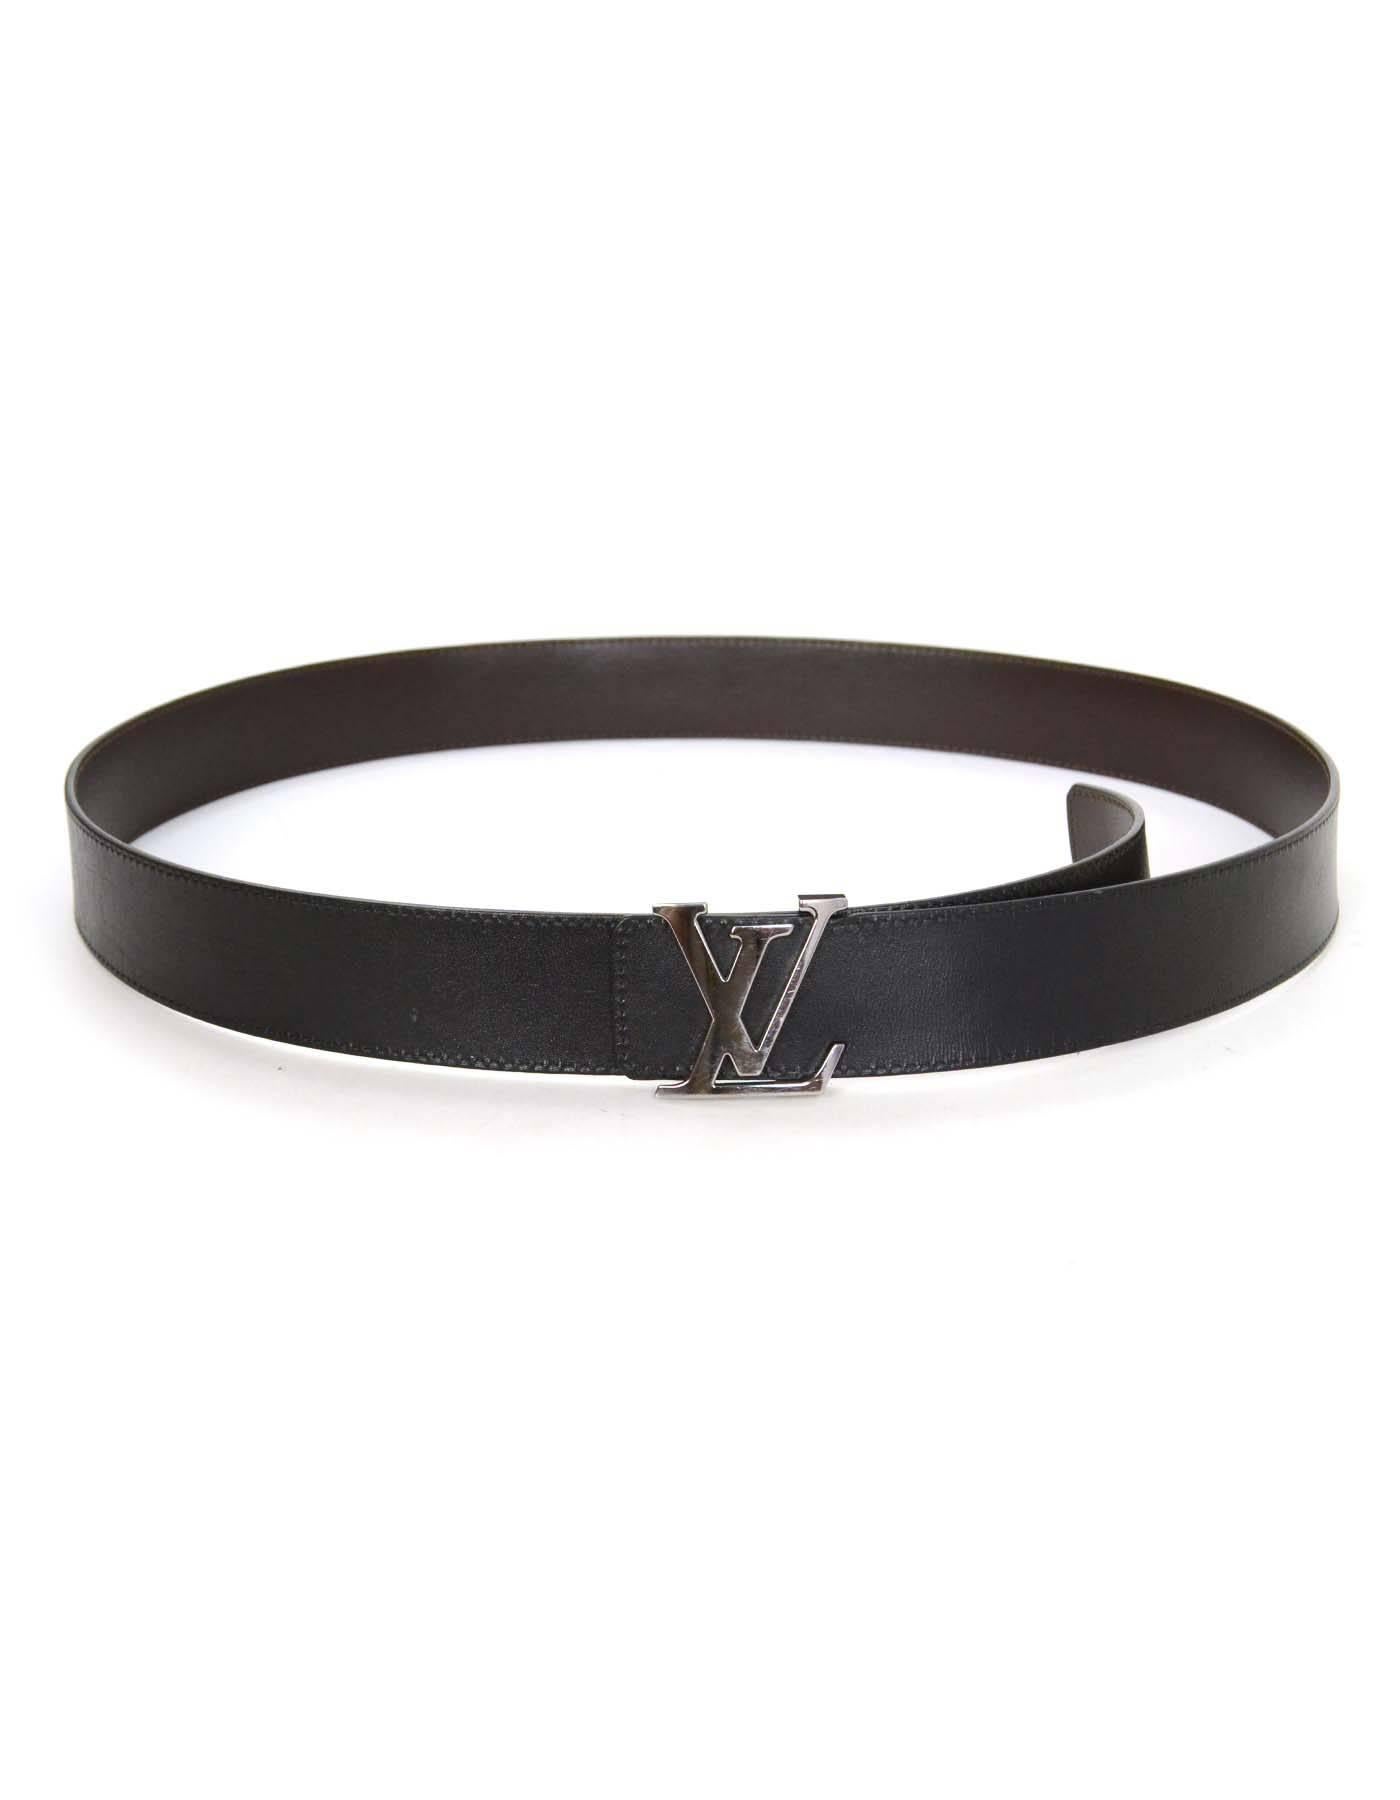 Louis Vuitton Black and Brown Leather Reversible Belt Sz 110

Features LV buckle with peg closure

Made In: Spain
Year of Production: 2013
Color: Black and brown
Hardware: Silver-tone
Materials: Calfskin leather
Stamp/Code: CA0123
Overall